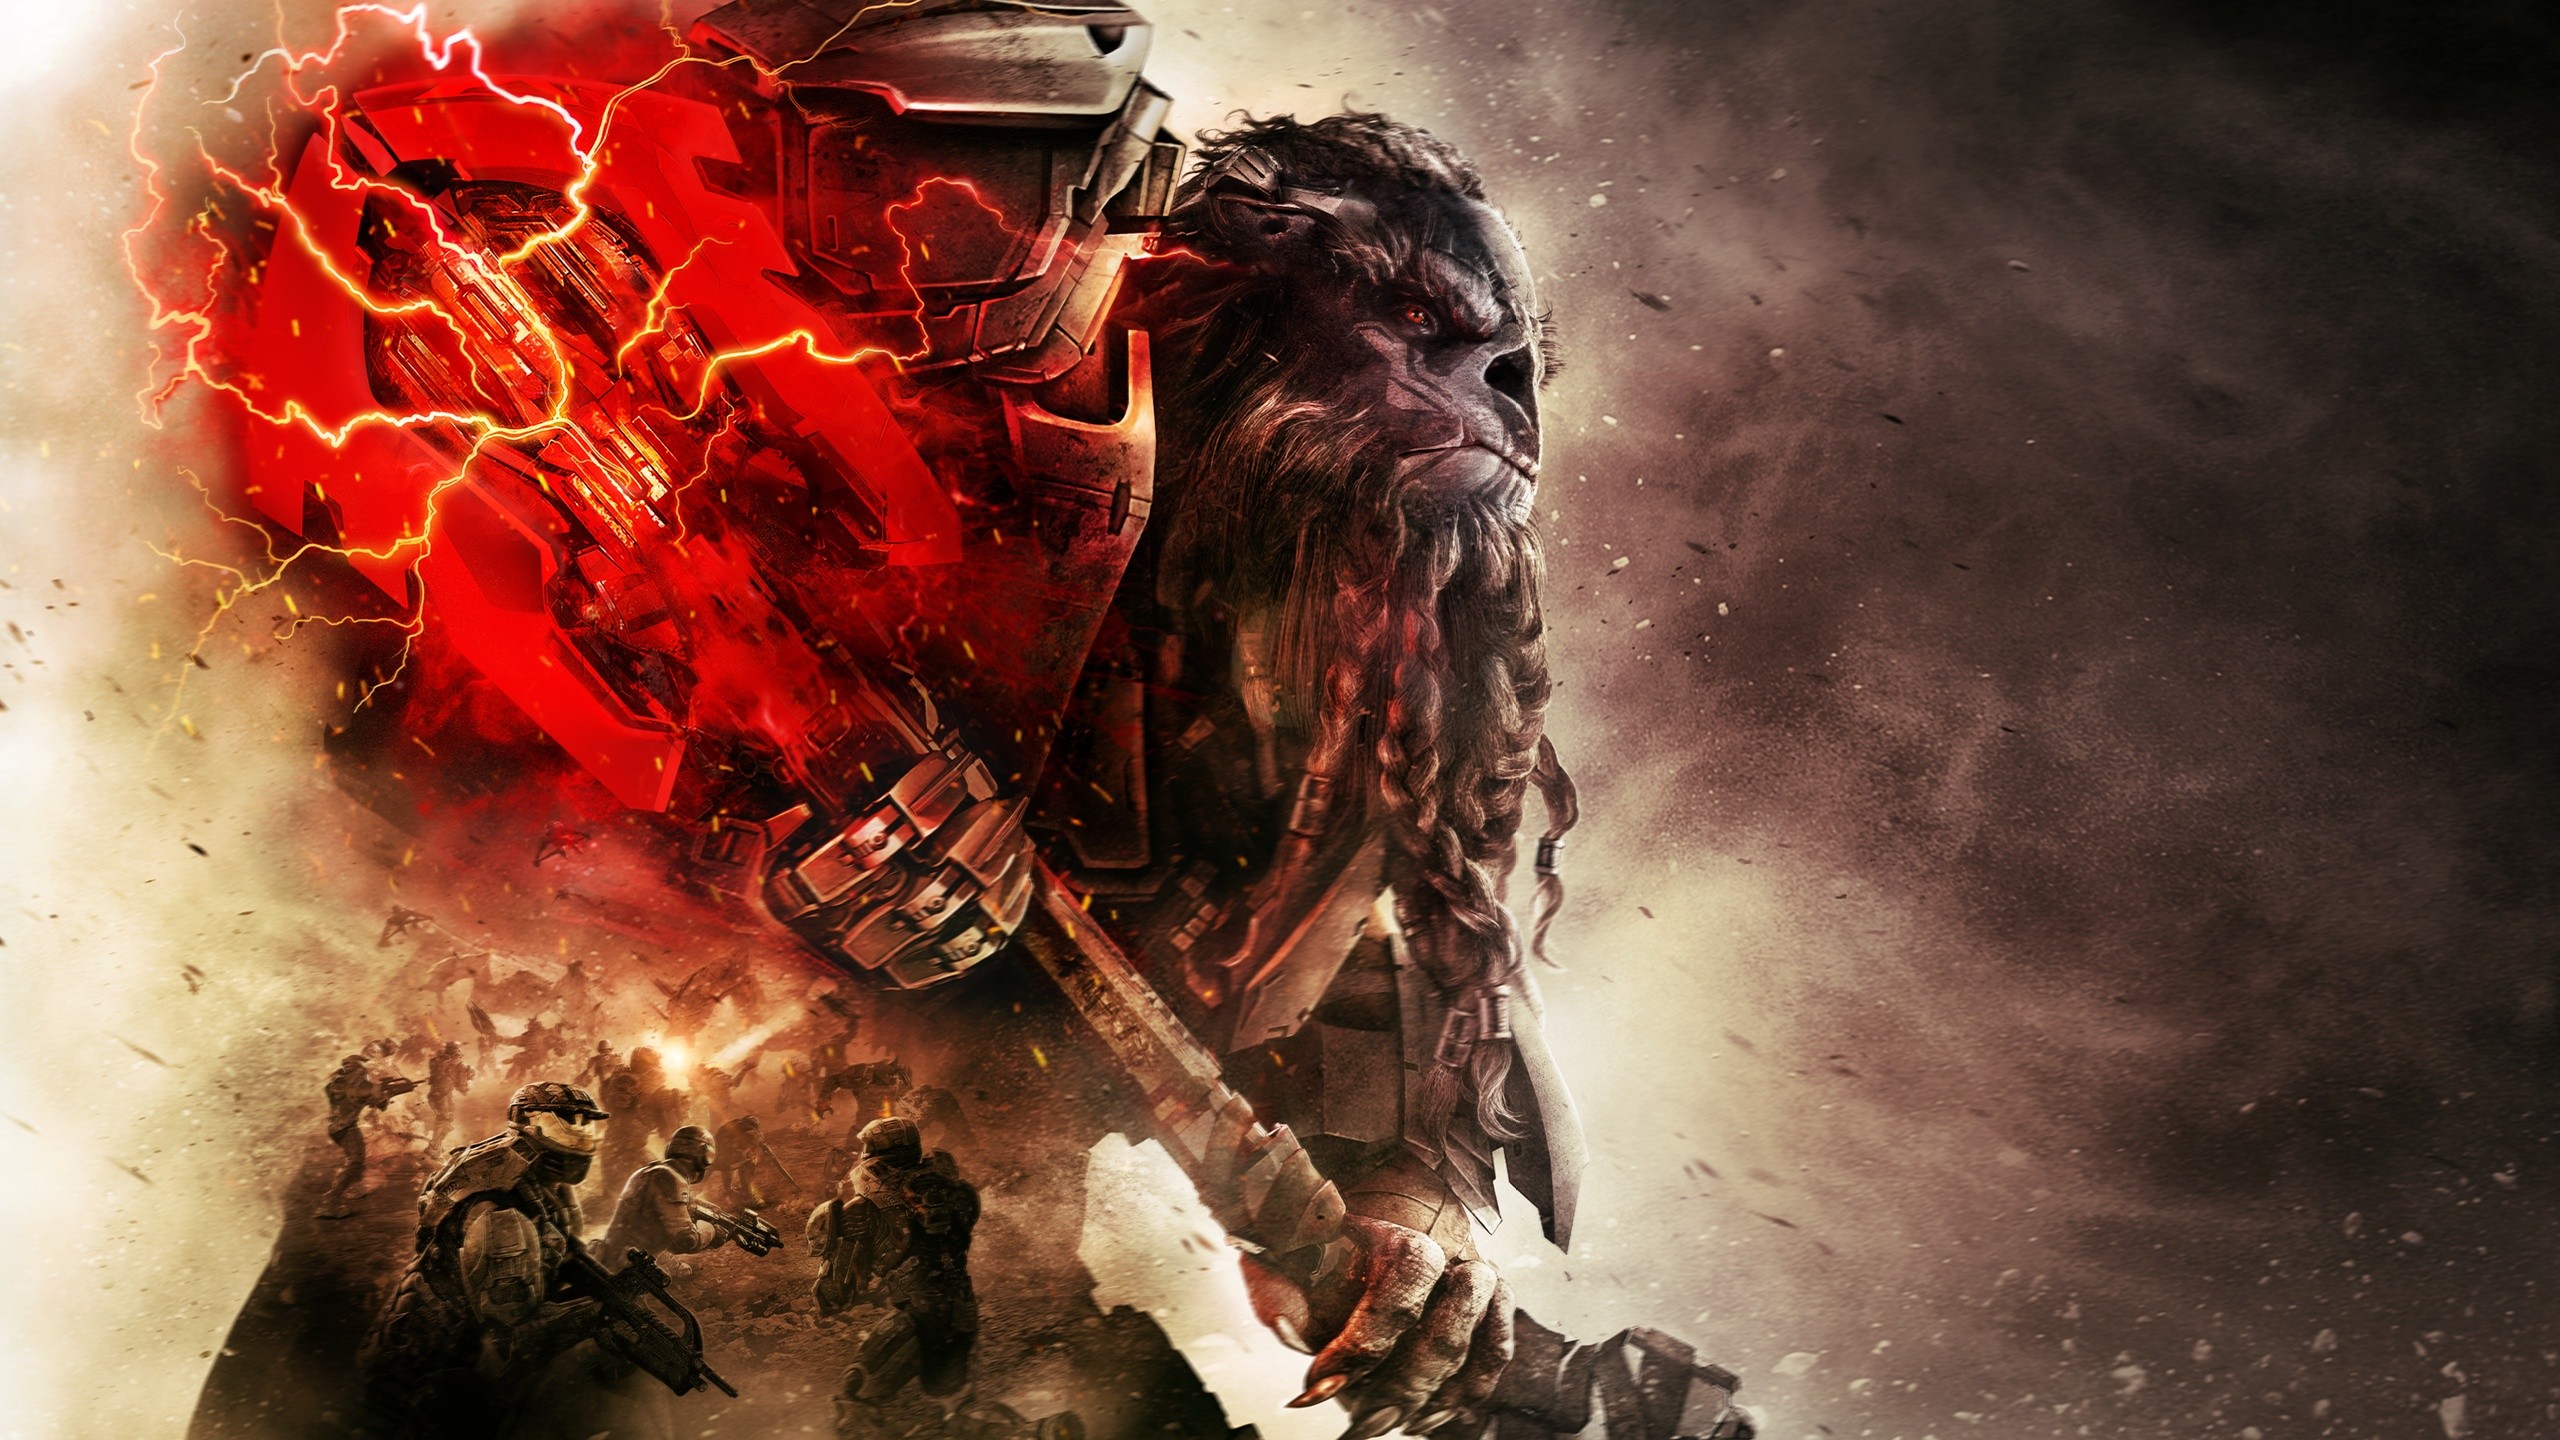 2560x1440 Halo Wars 2 HD Xbox One Wallpapers